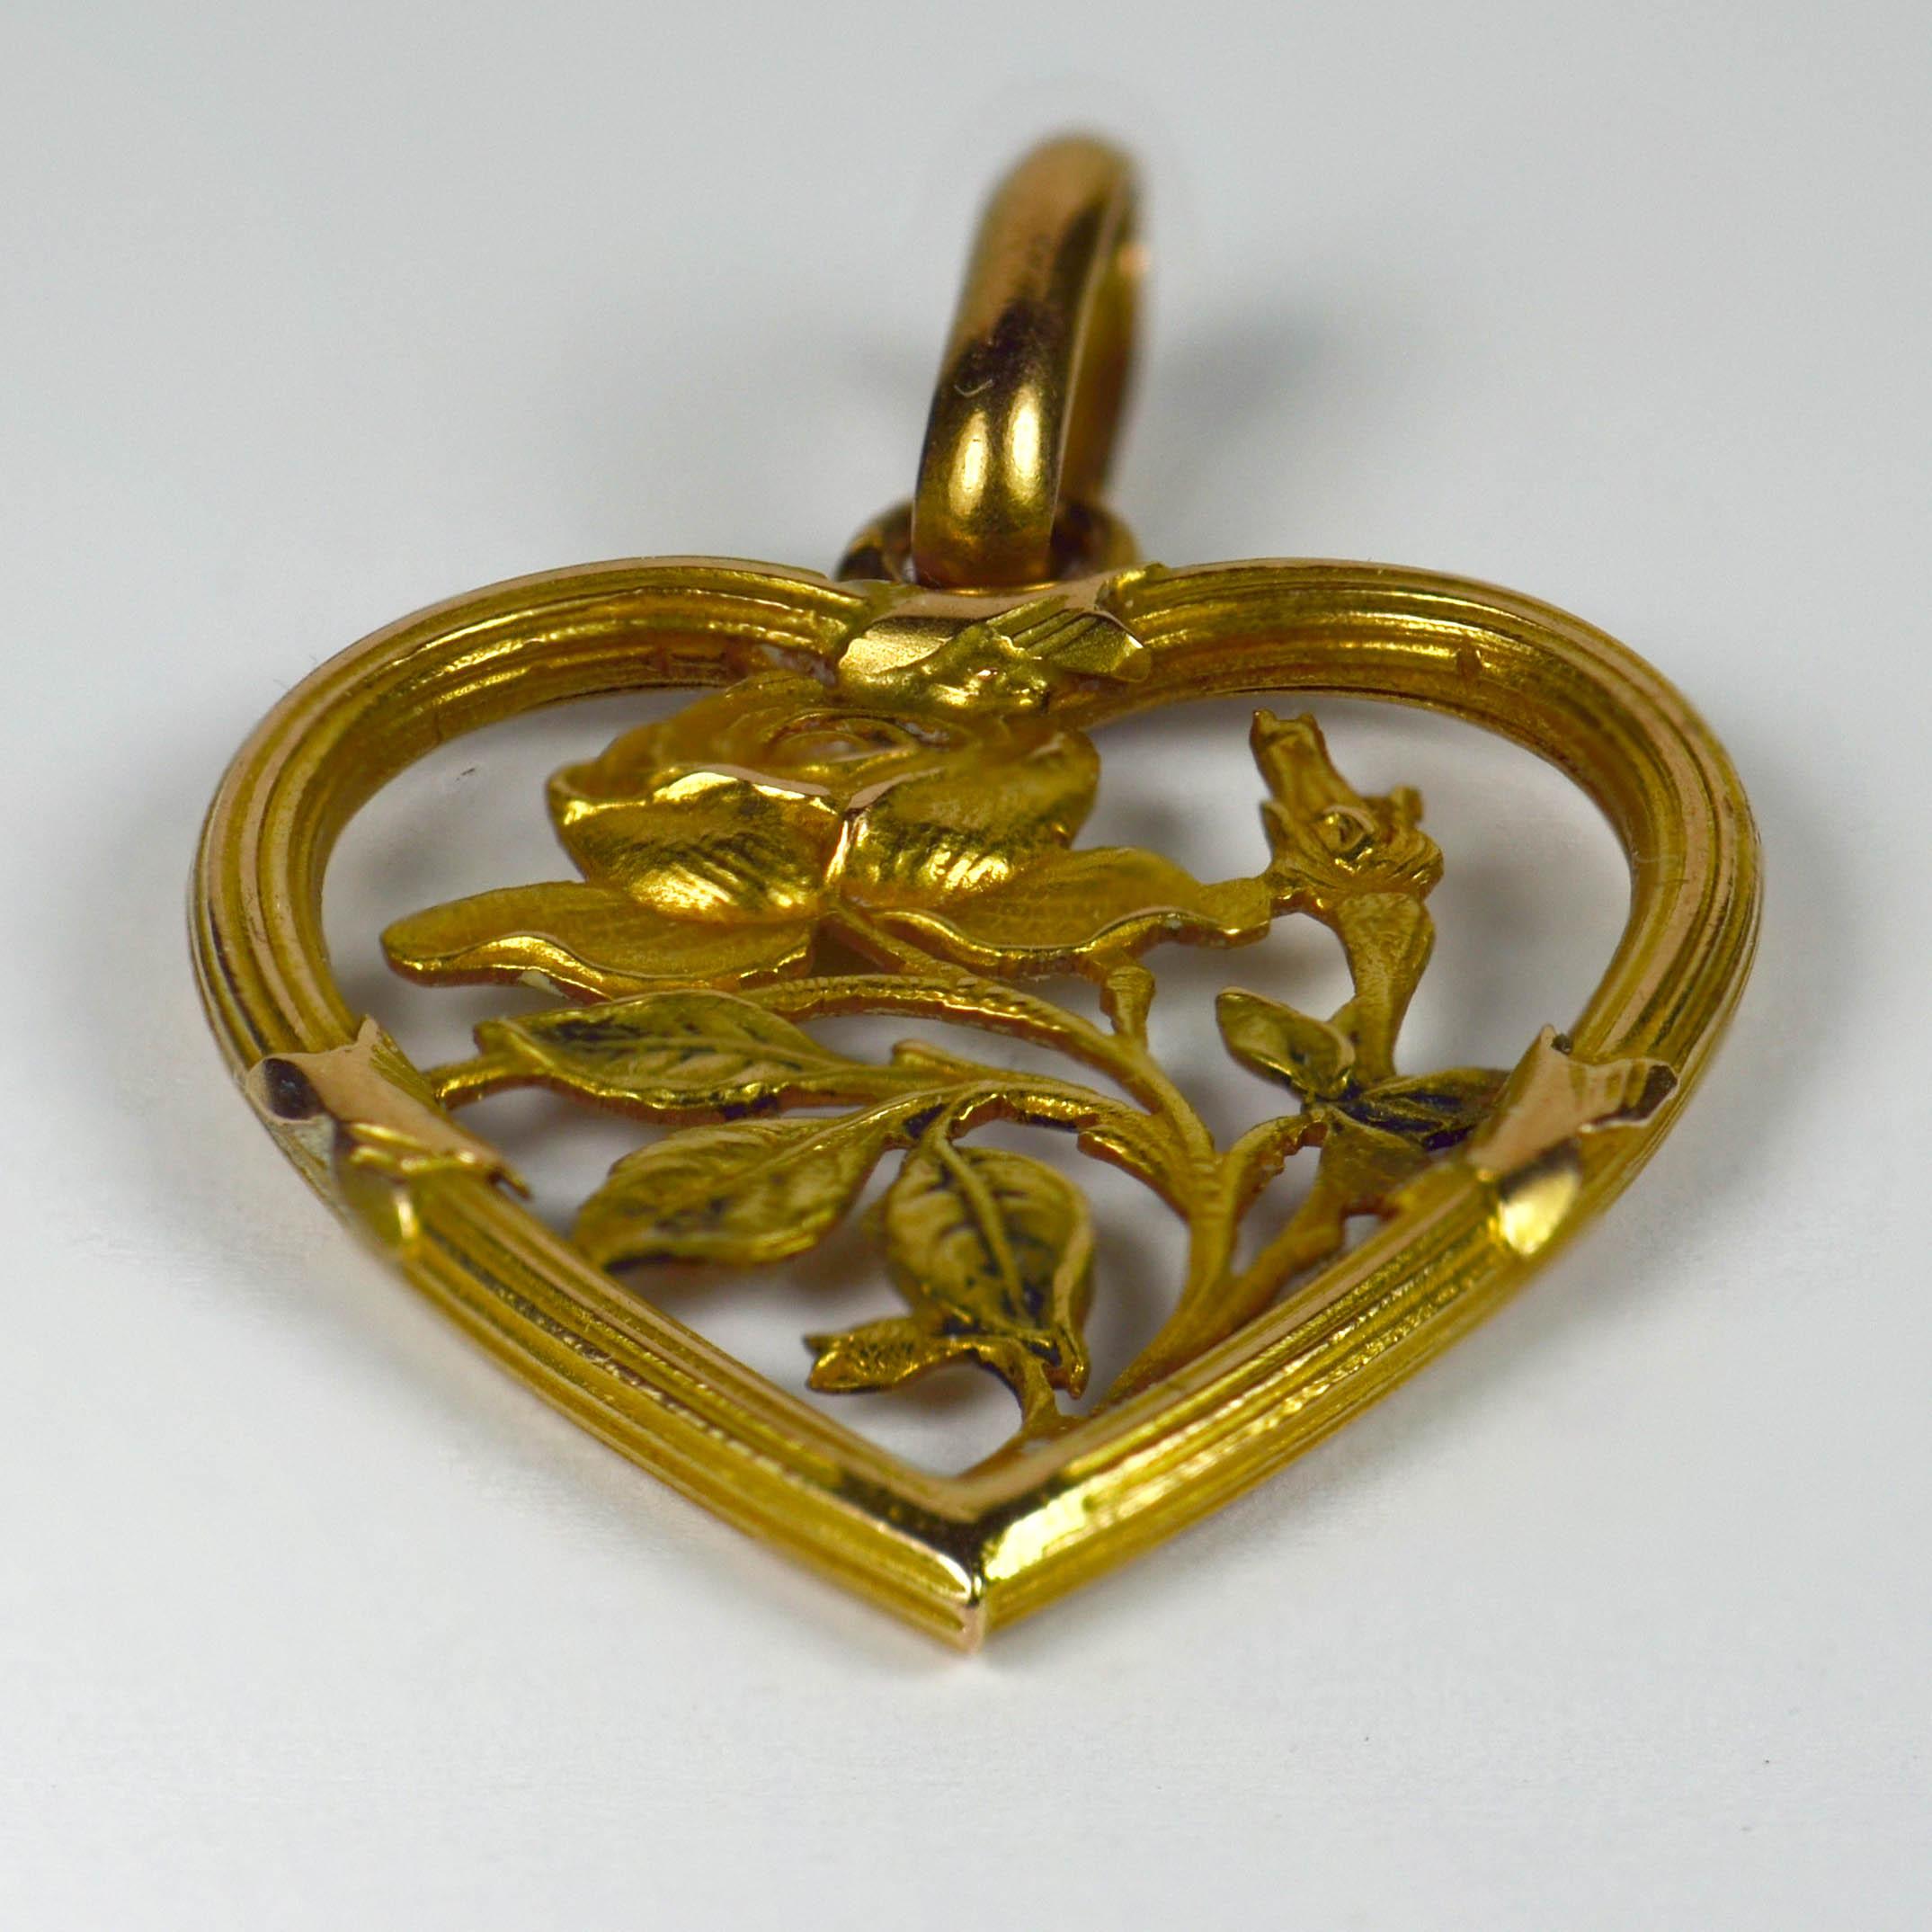 An Art Nouveau charm or pendant in 18 karat yellow gold designed as a reeded heart shaped frame bound with crosses of ribbon, enclosing a rose in full bloom with a secondary rosebud. Stamped with the eagle's head for French manufacture and 18 karat